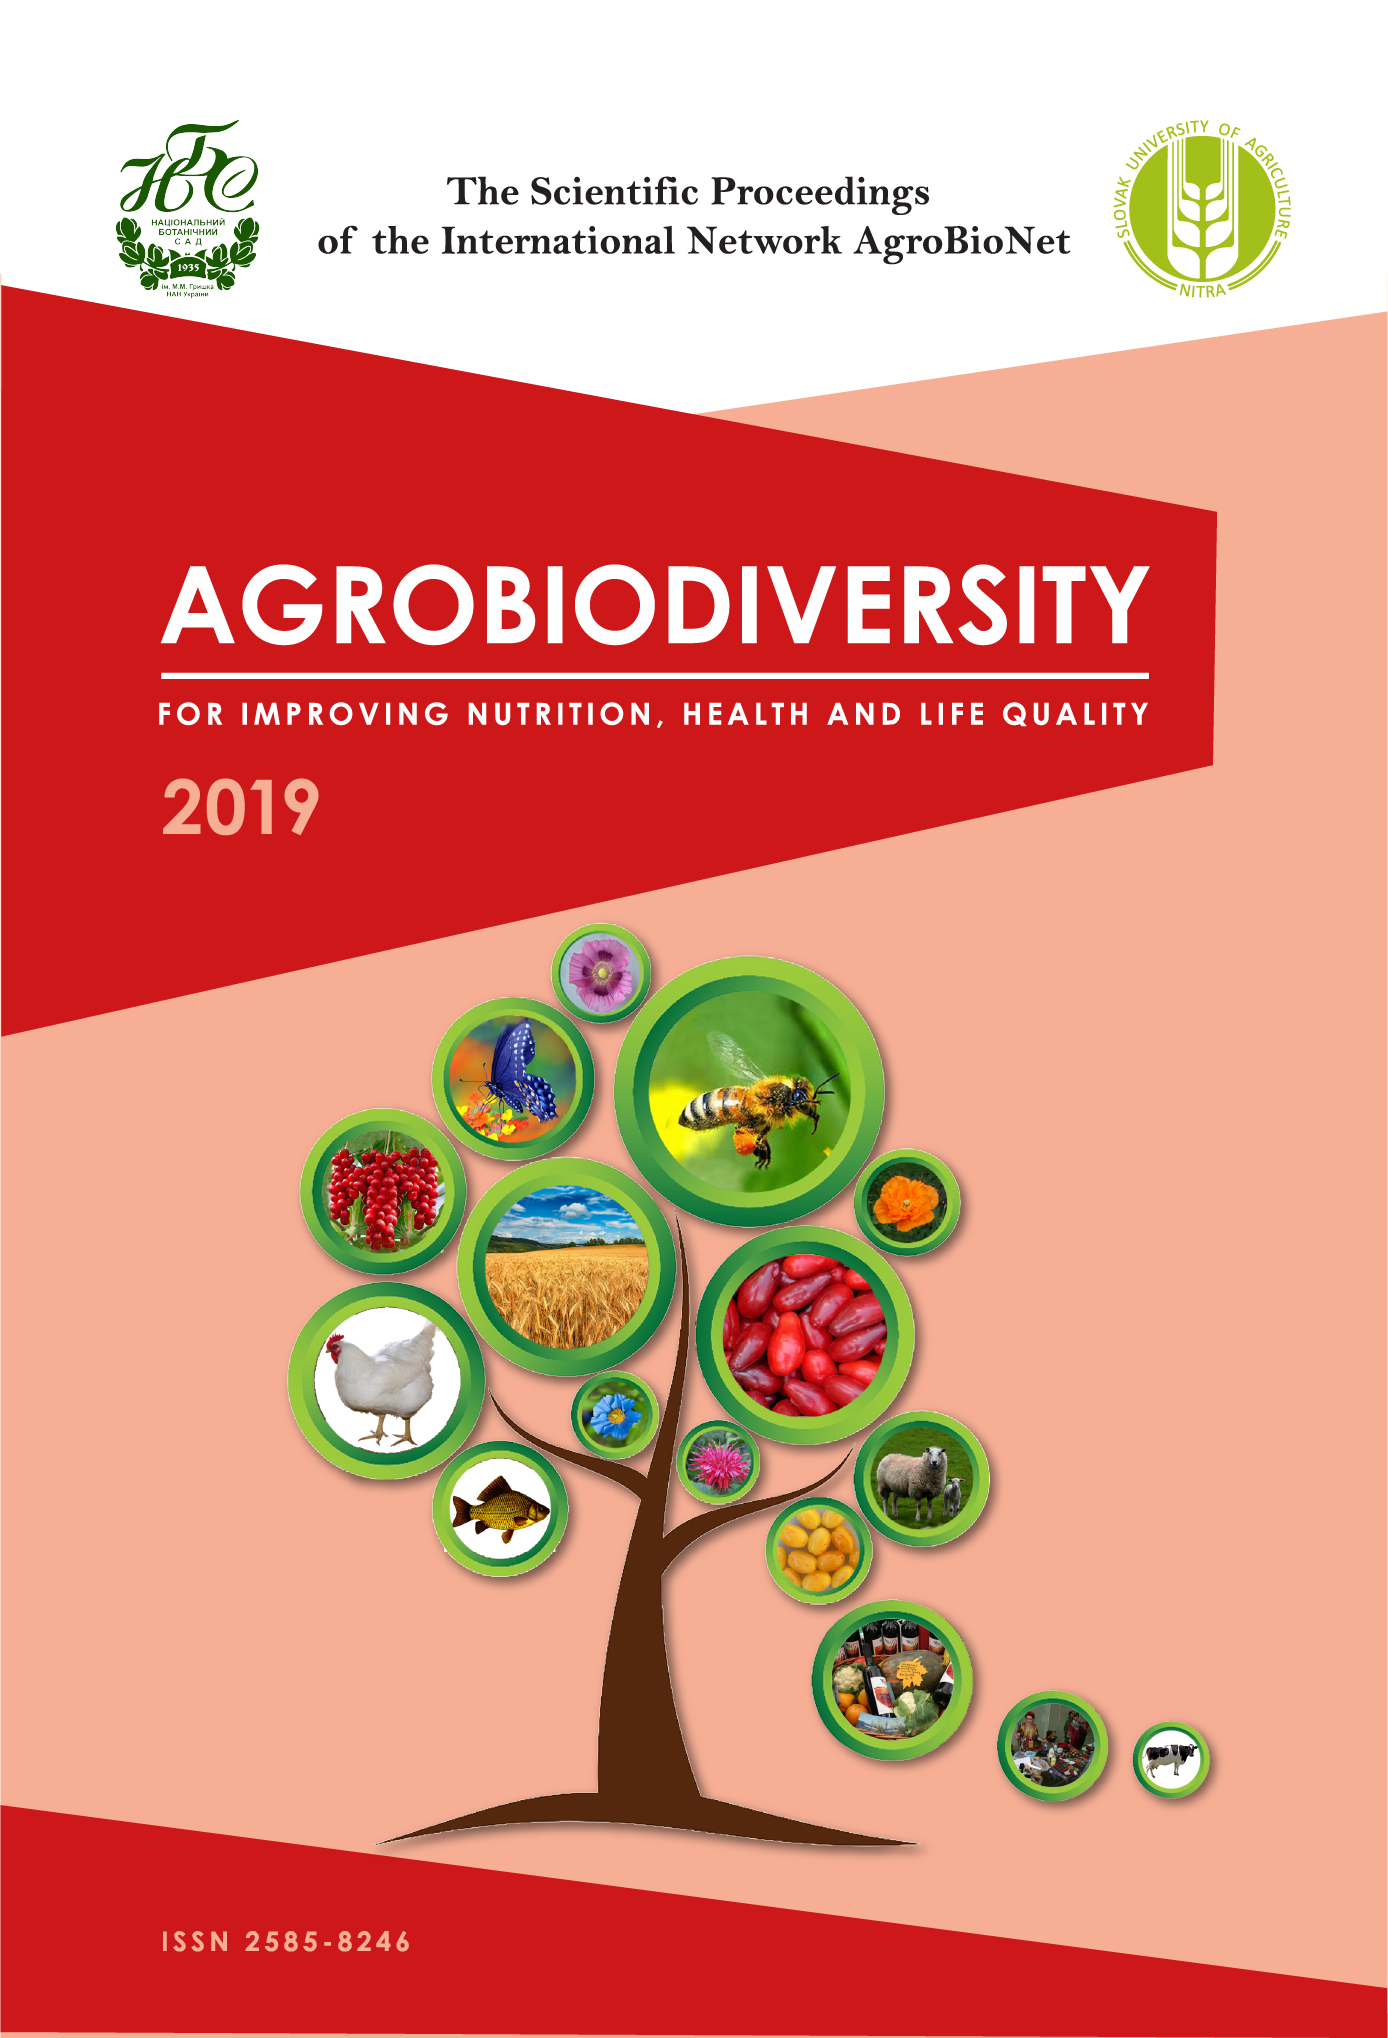 Agrobiodiversity for Improving Nutrition, Health and Life Quality